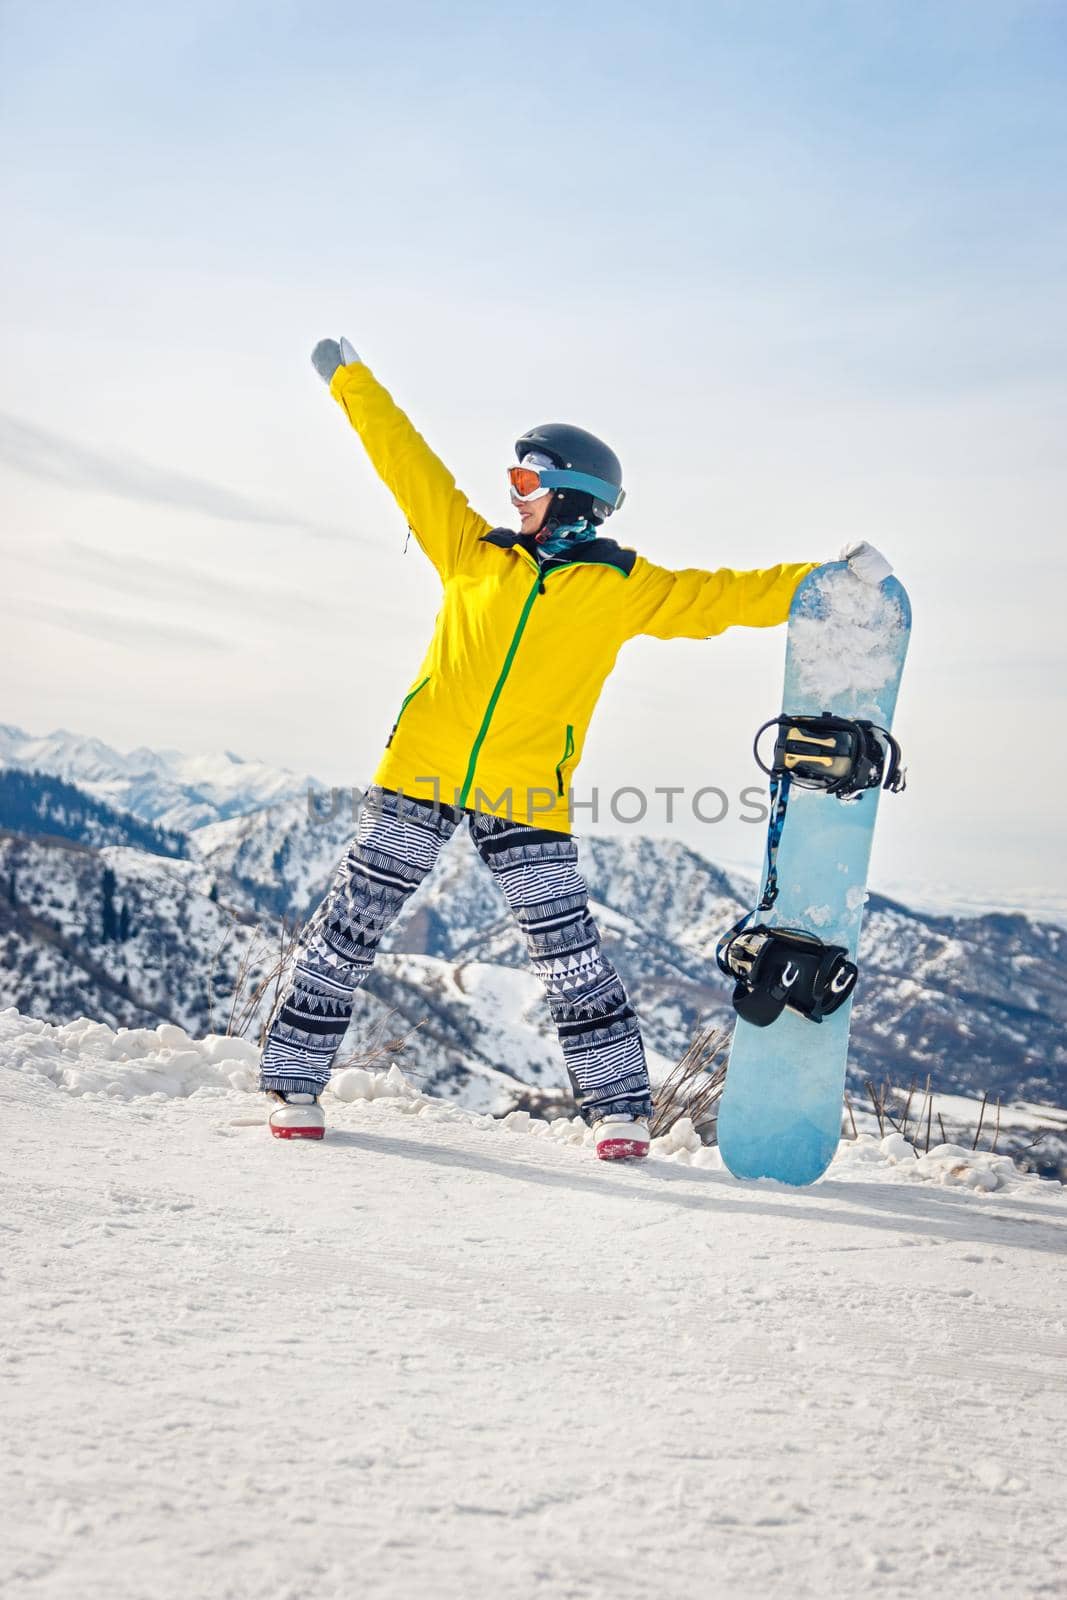 Young woman snowboarder in a yellow jacket and black helmet on the background of snowy mountains